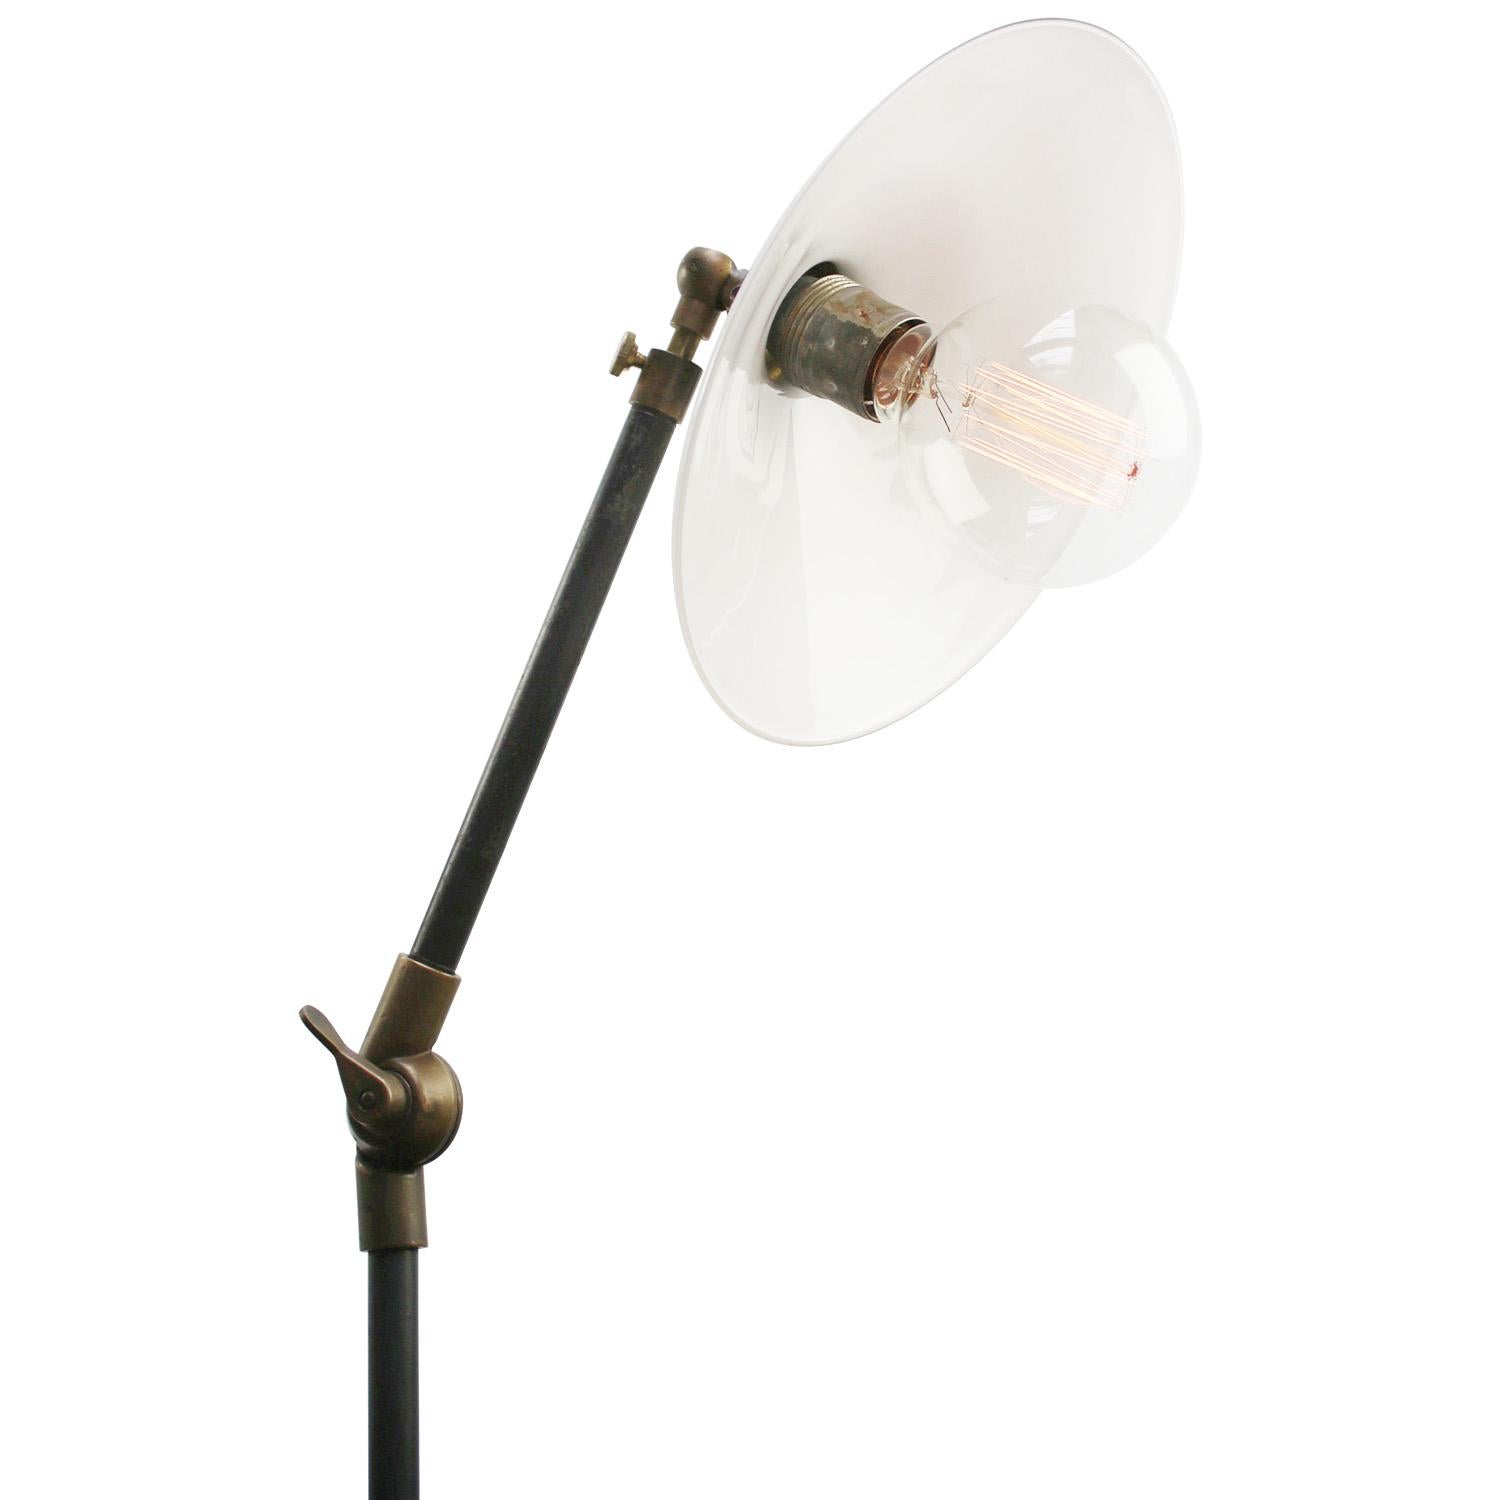 White opaline vintage floor lamp
Cast iron with brass joints
Adjustable in angle. 

Diameter foot 23 cm

Electric wire 2 meter / 80” with plug and floor switch

Available with UK / US plug

Priced per individual item. All lamps have been made